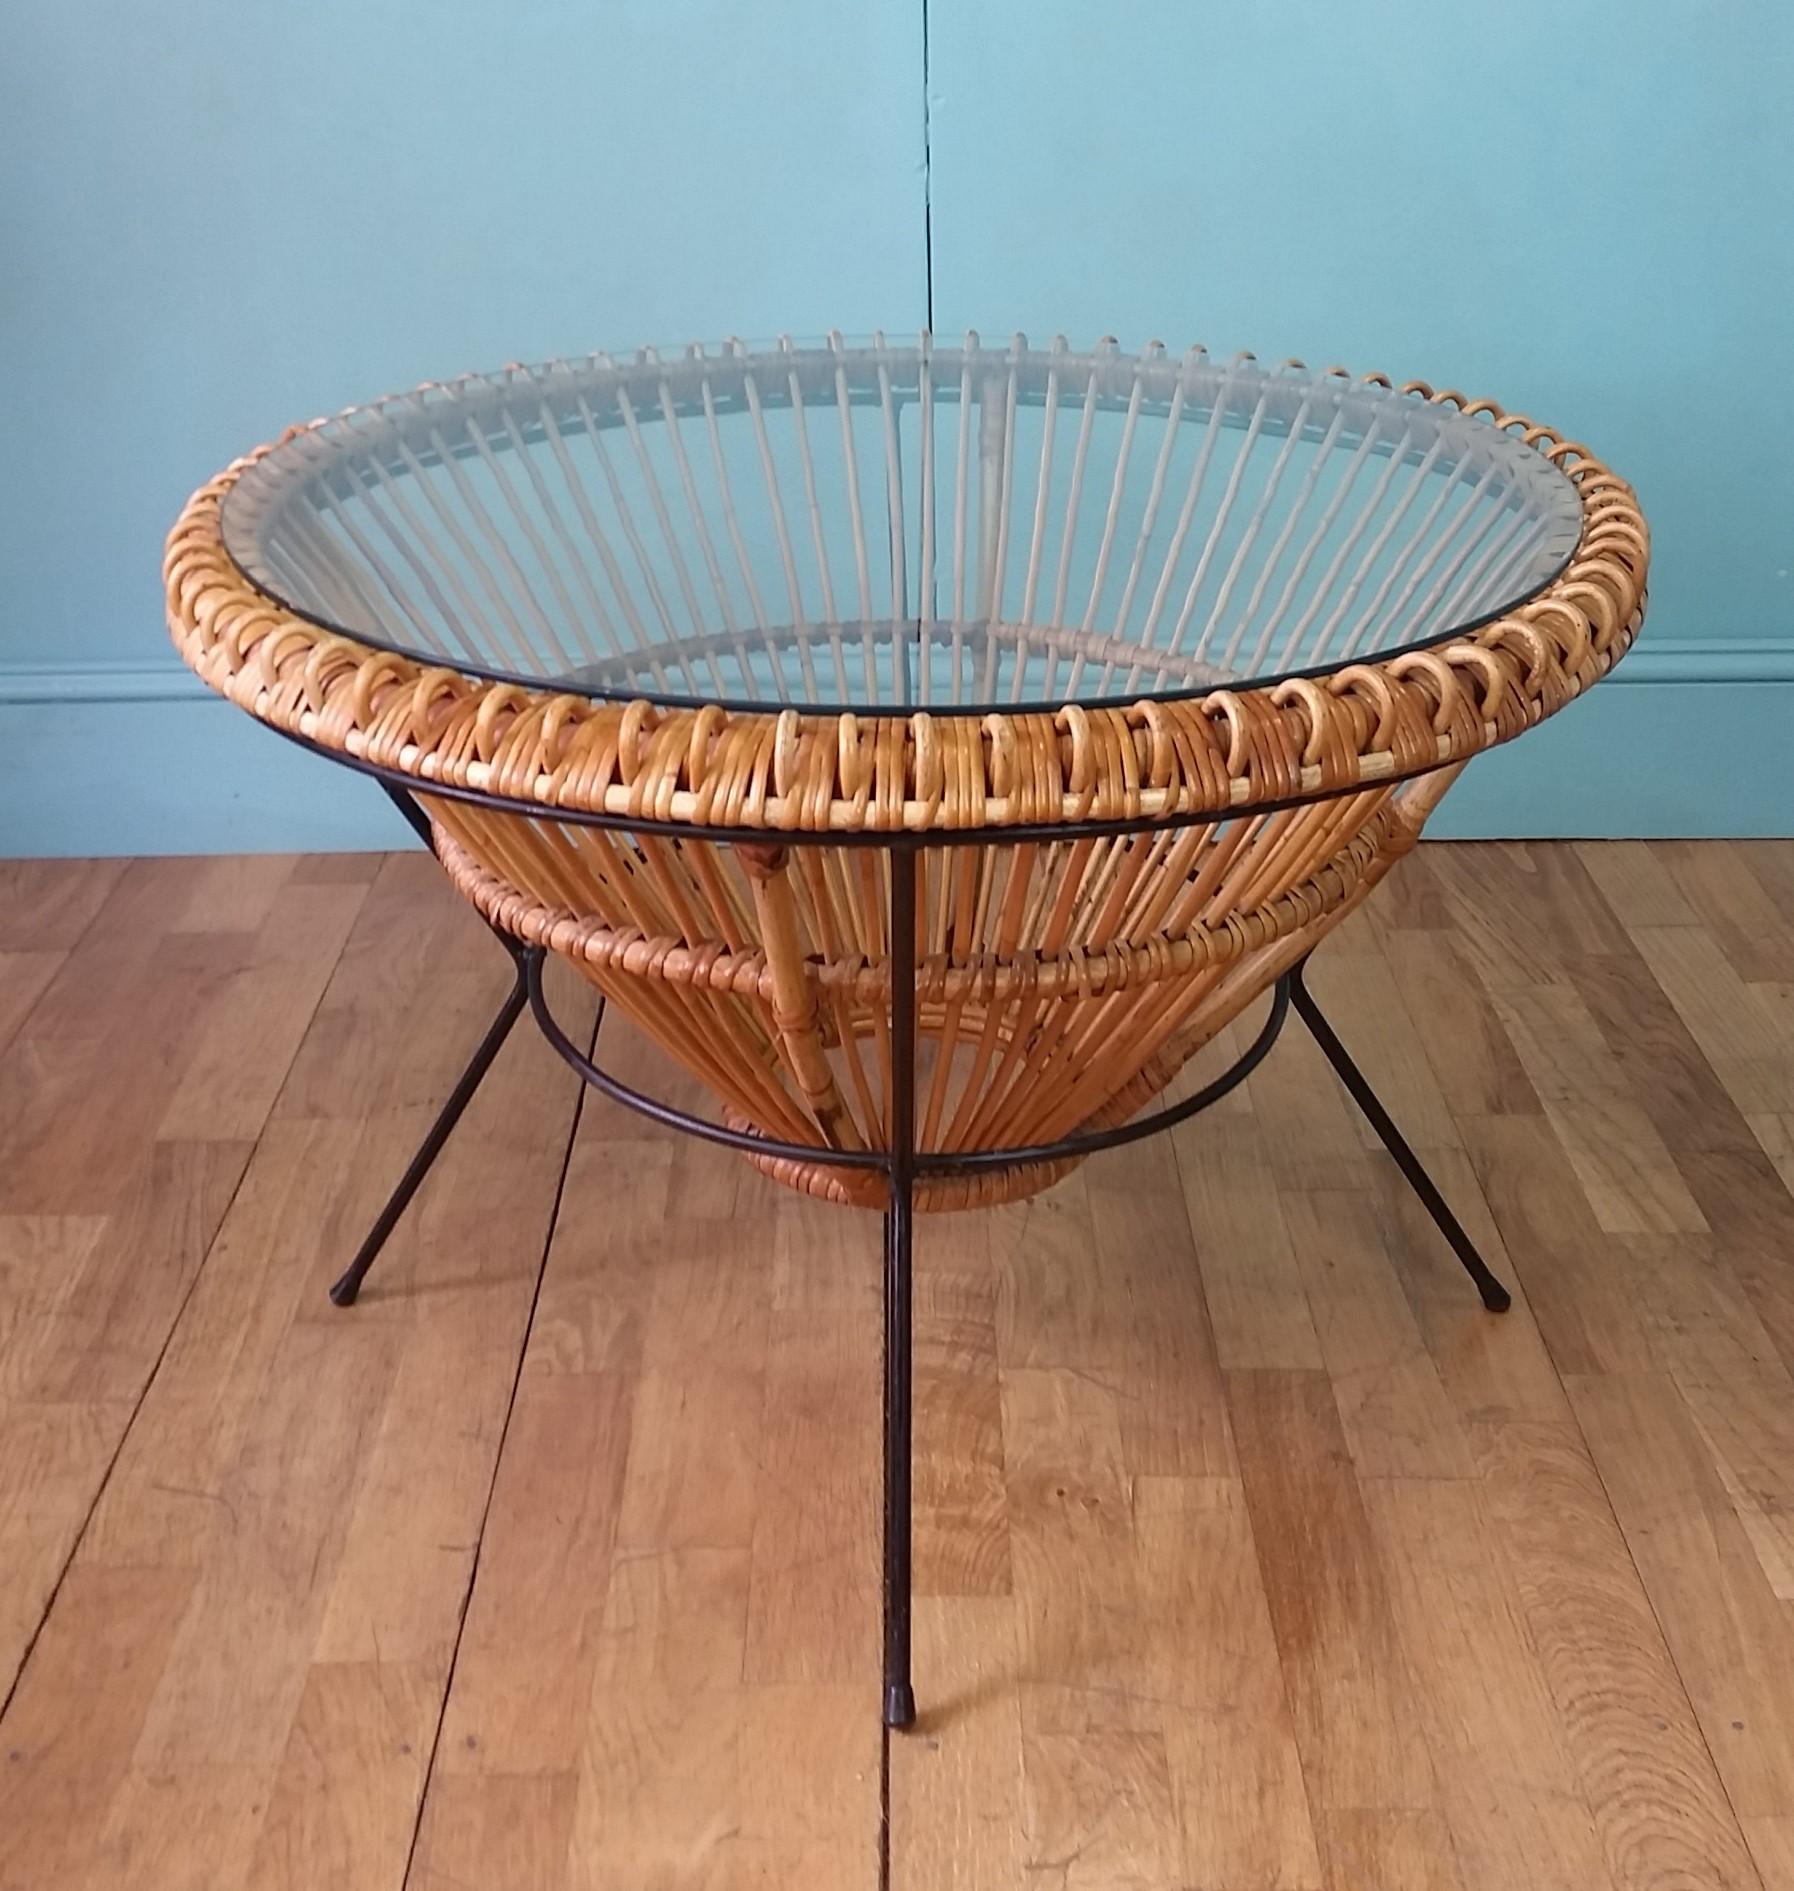 The iconic Franco Albini designed coffee table circa 1960's
Steel base in original factory black finish with Rattan frame and glass top all in lovely mid century condition.
In full working order with no chips or damage to the lift out glass